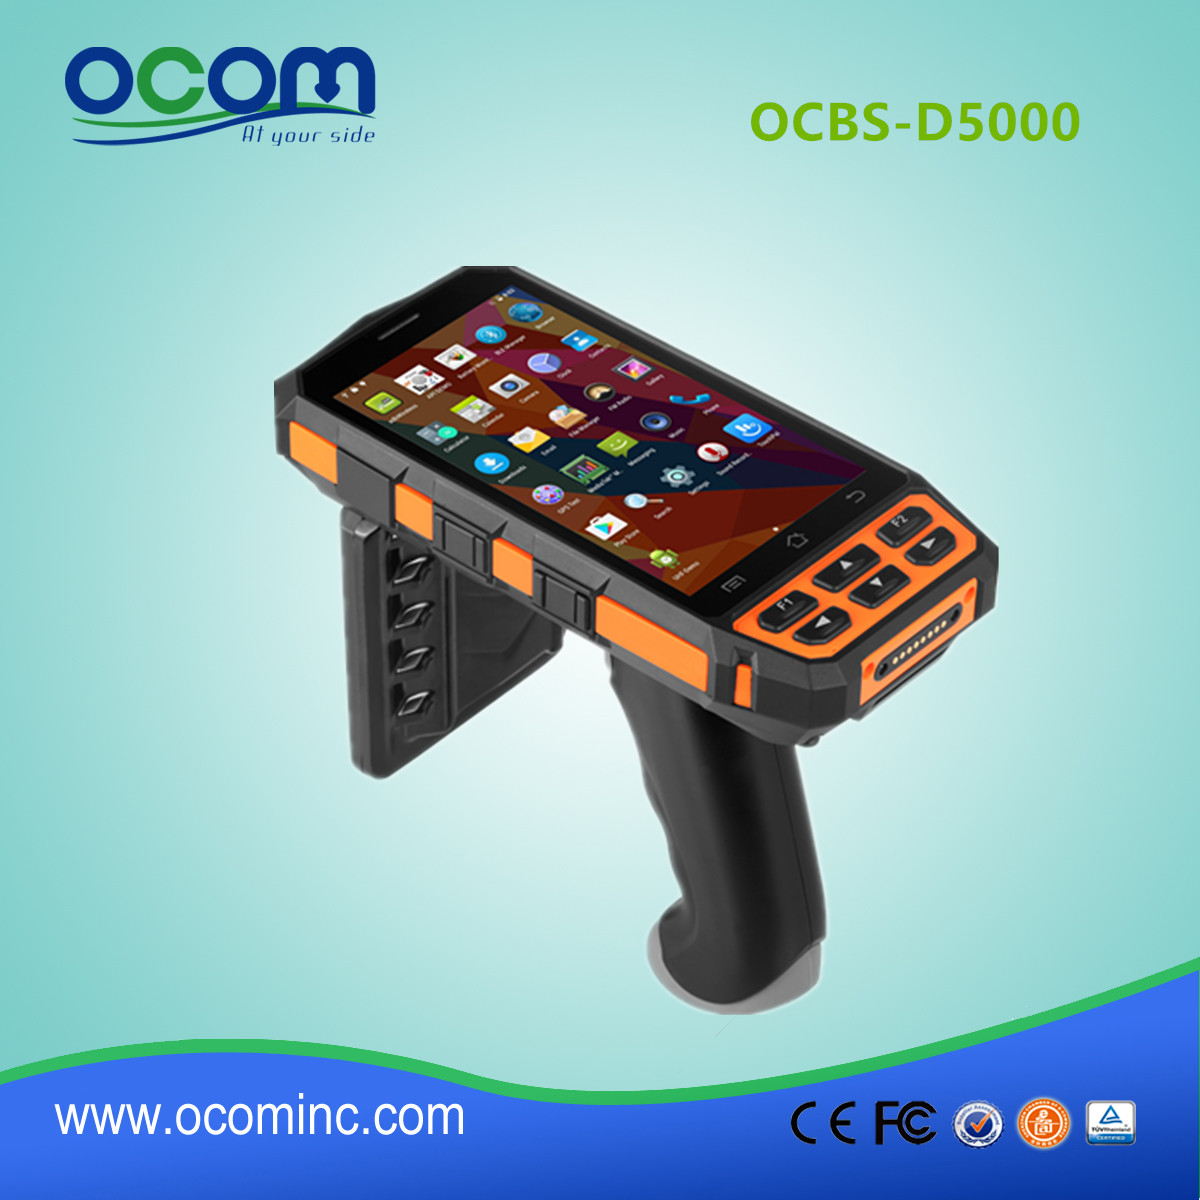 OCBS-D5000 Android 5.0" 4G handheld data terminal PDA with optional UHF